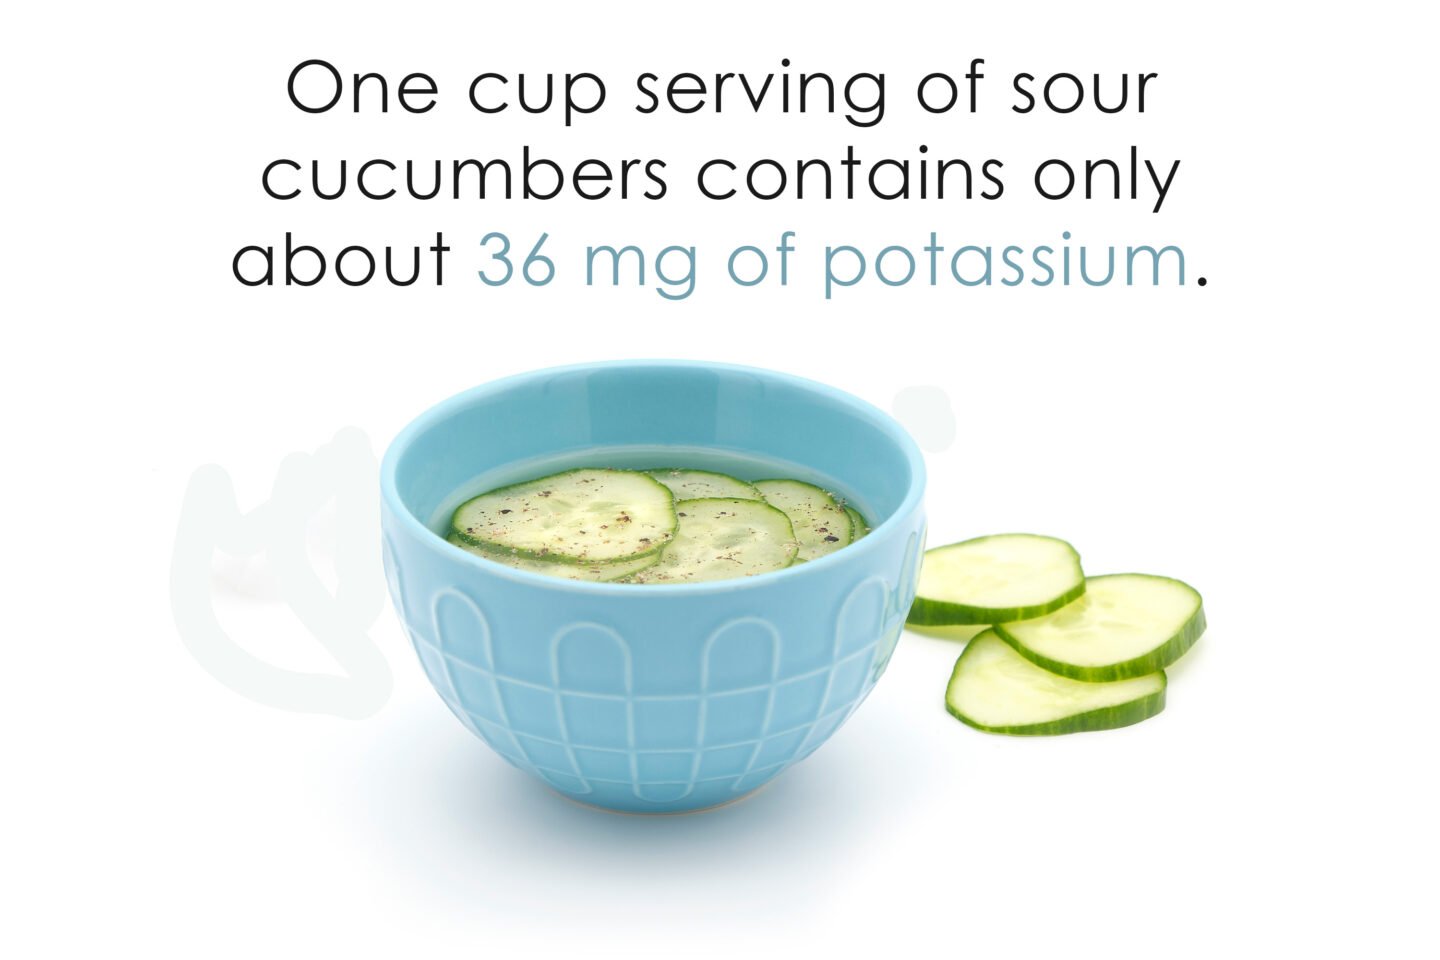 potassium in one cup of sour cucumbers